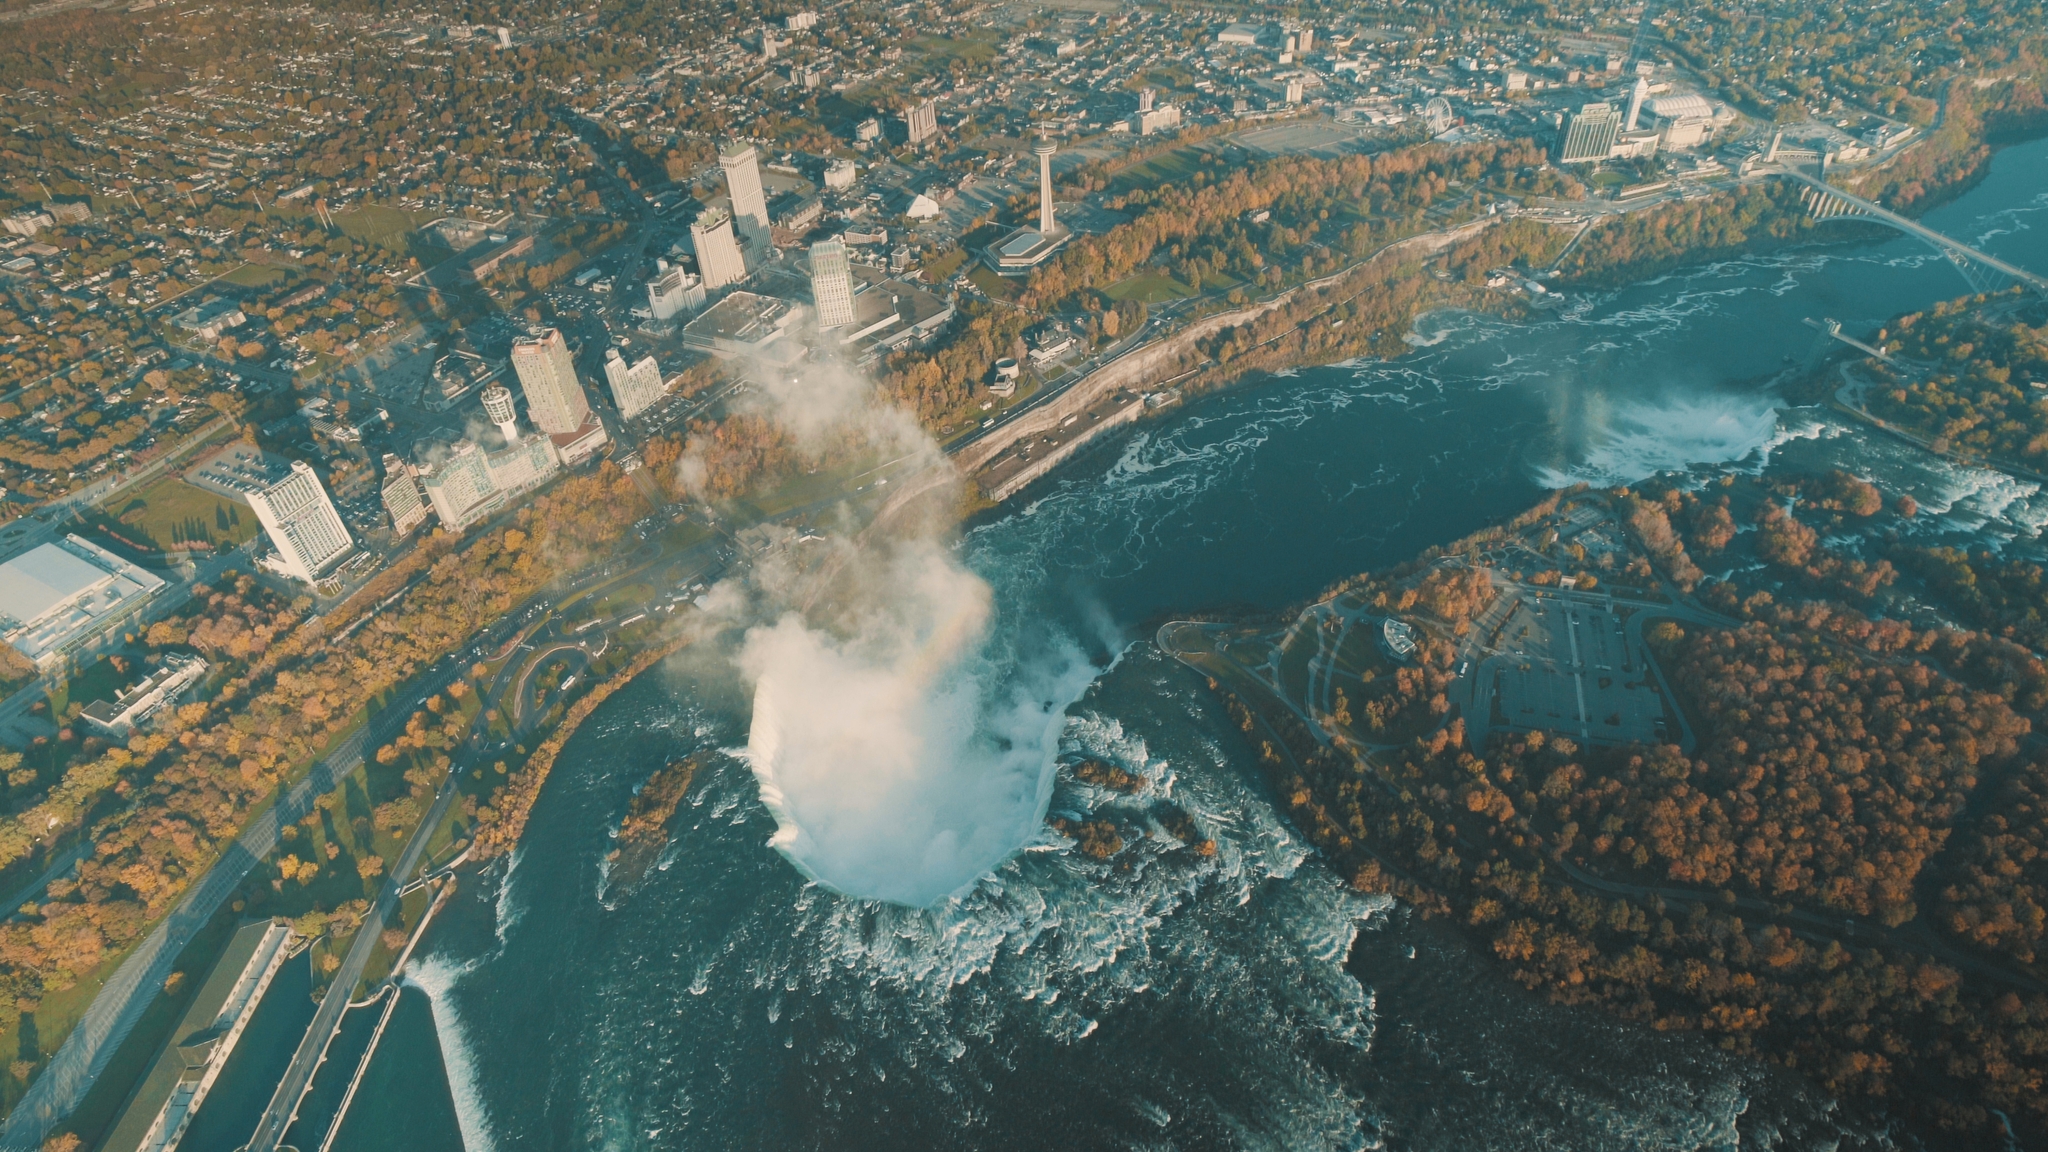 https://res.cloudinary.com/see-sight-tours/image/upload/v1581439709/Niagara-Falls-view-from-helicopter.jpg